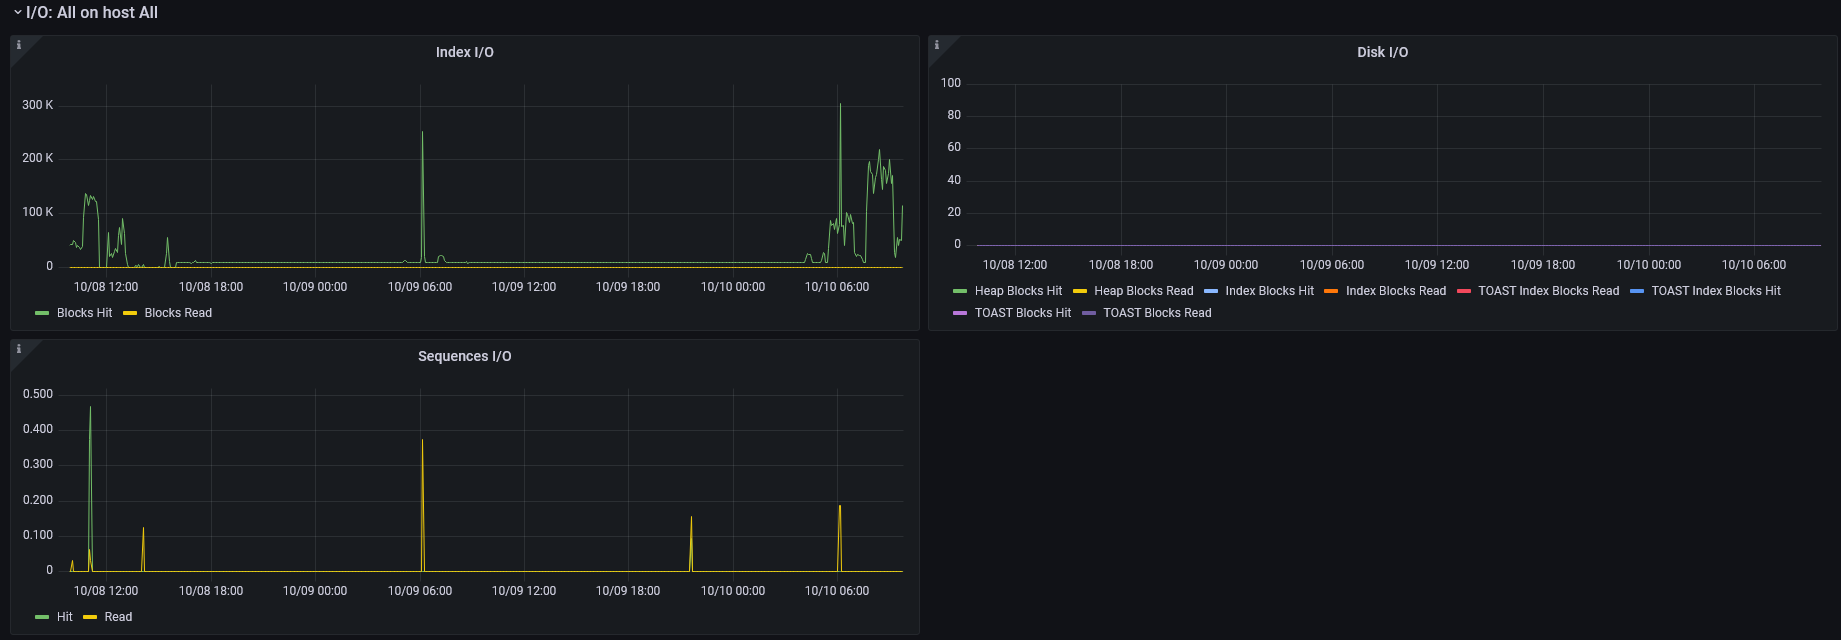 https://raw.githubusercontent.com/post-luxembourg/pgflux/v1.0.1/docs/_images/grafana-dashboard-03.png